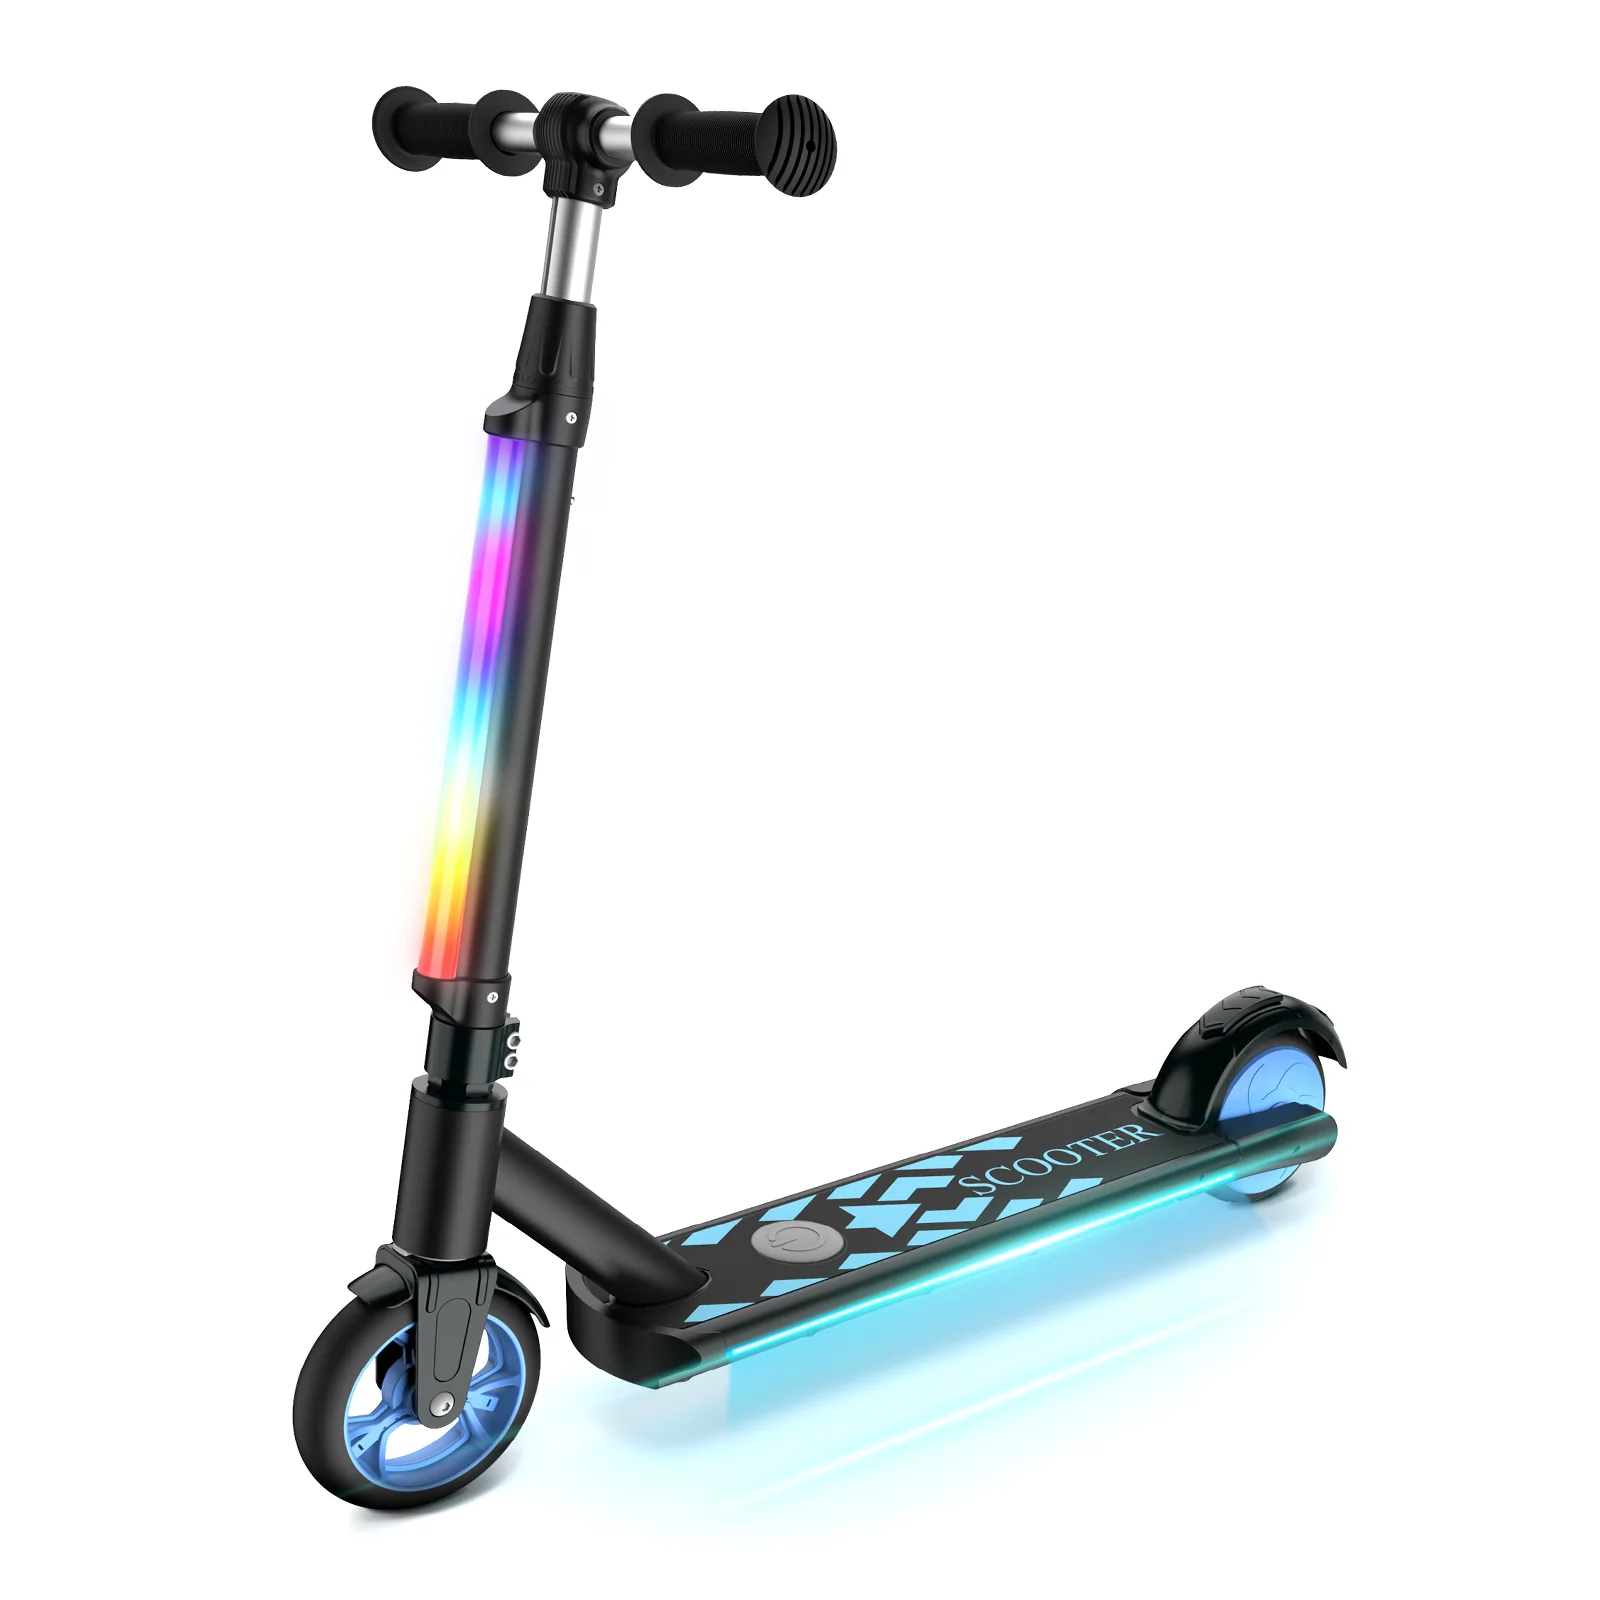 SISIGAD 530 (12 mph) Adjustable Electric Scooter